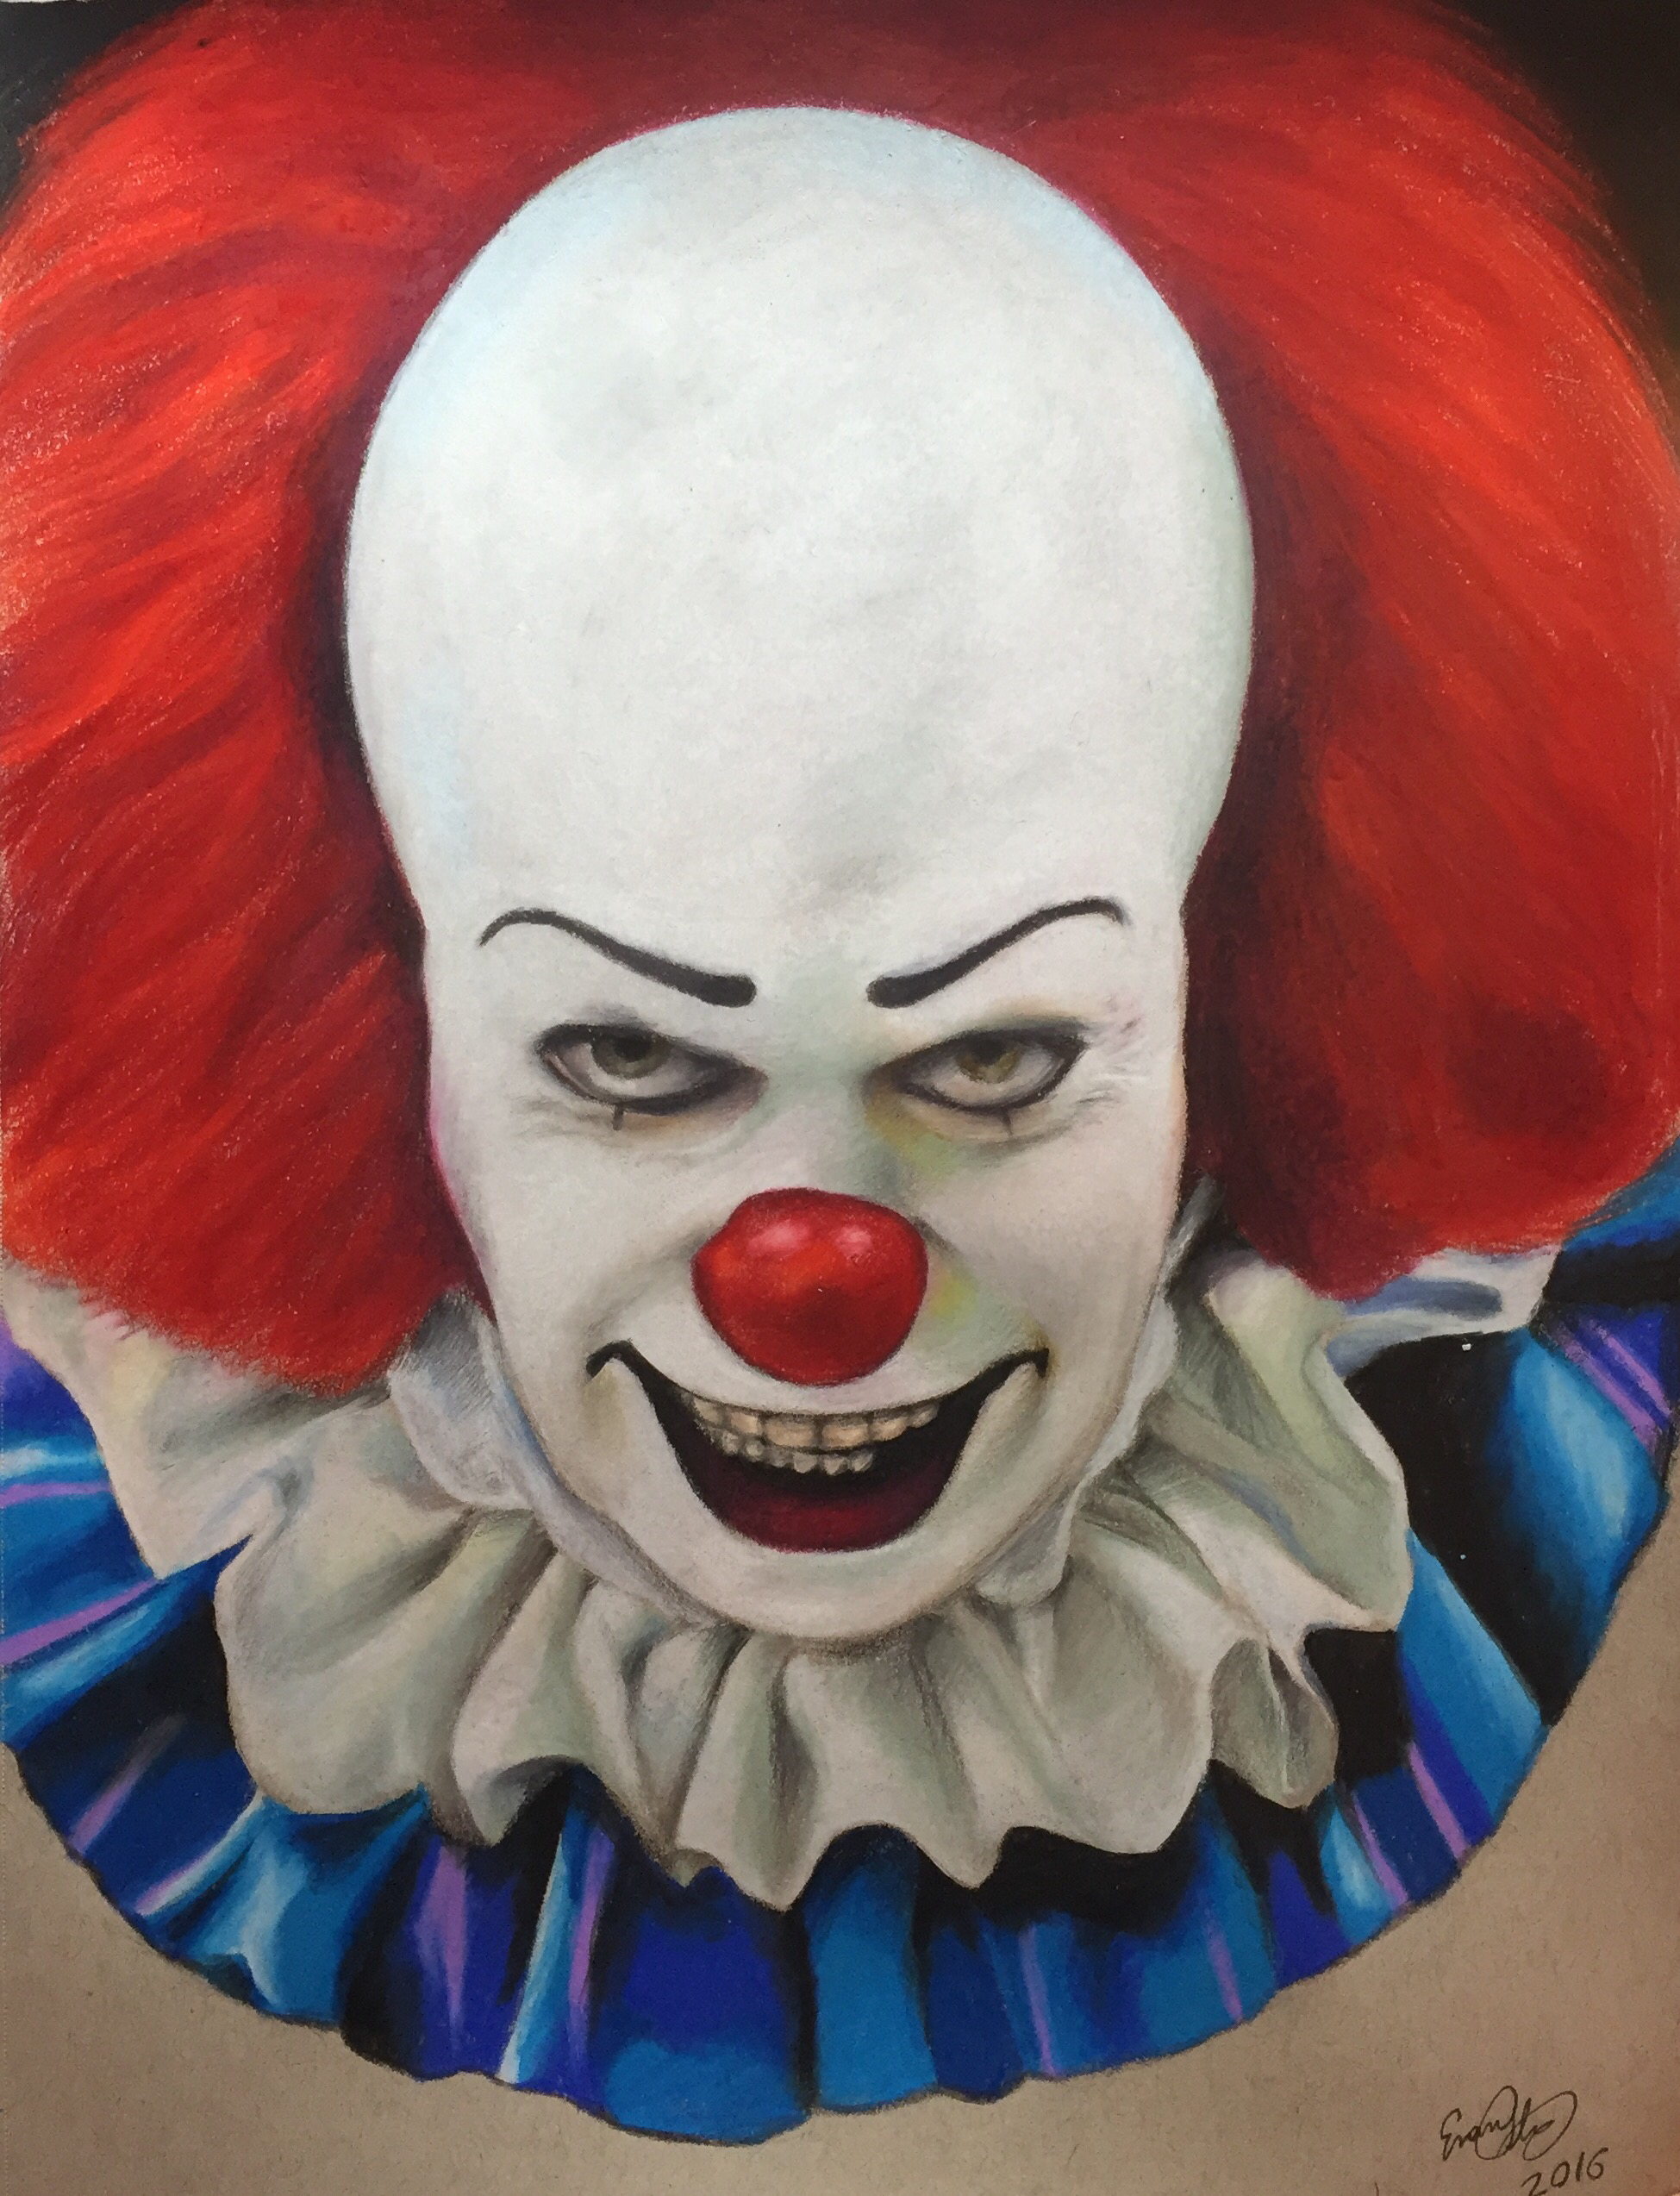 Pennywise the clown colored pencil drawing by evanartt on DeviantArt